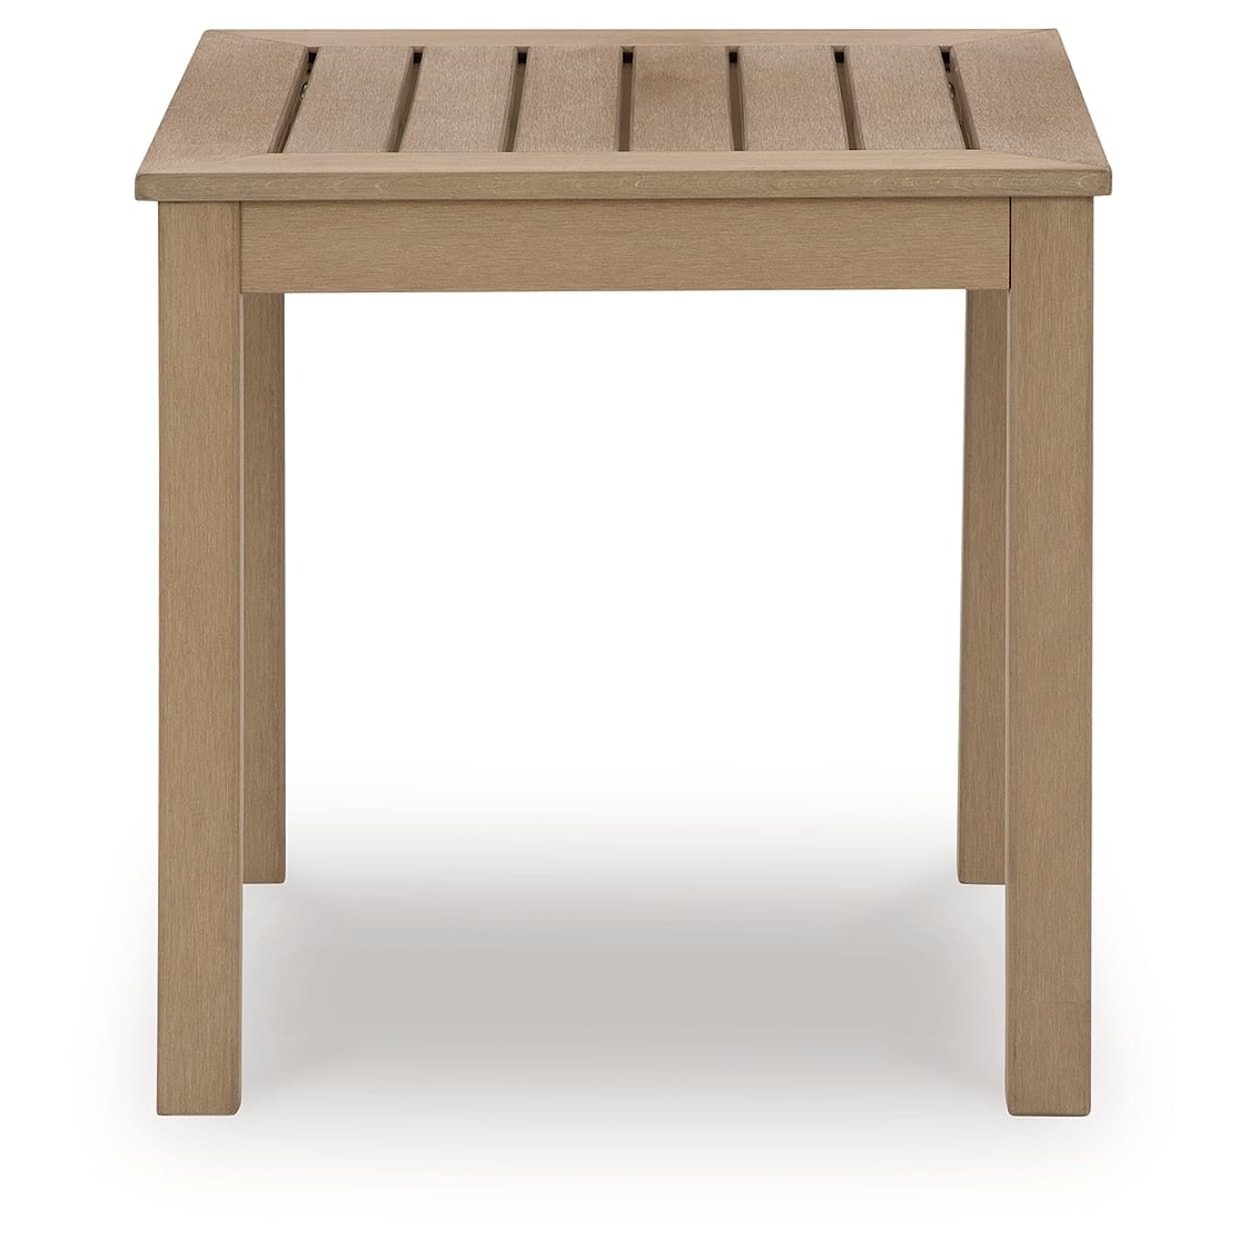 Signature Design by Ashley Hallow Creek Outdoor End Table